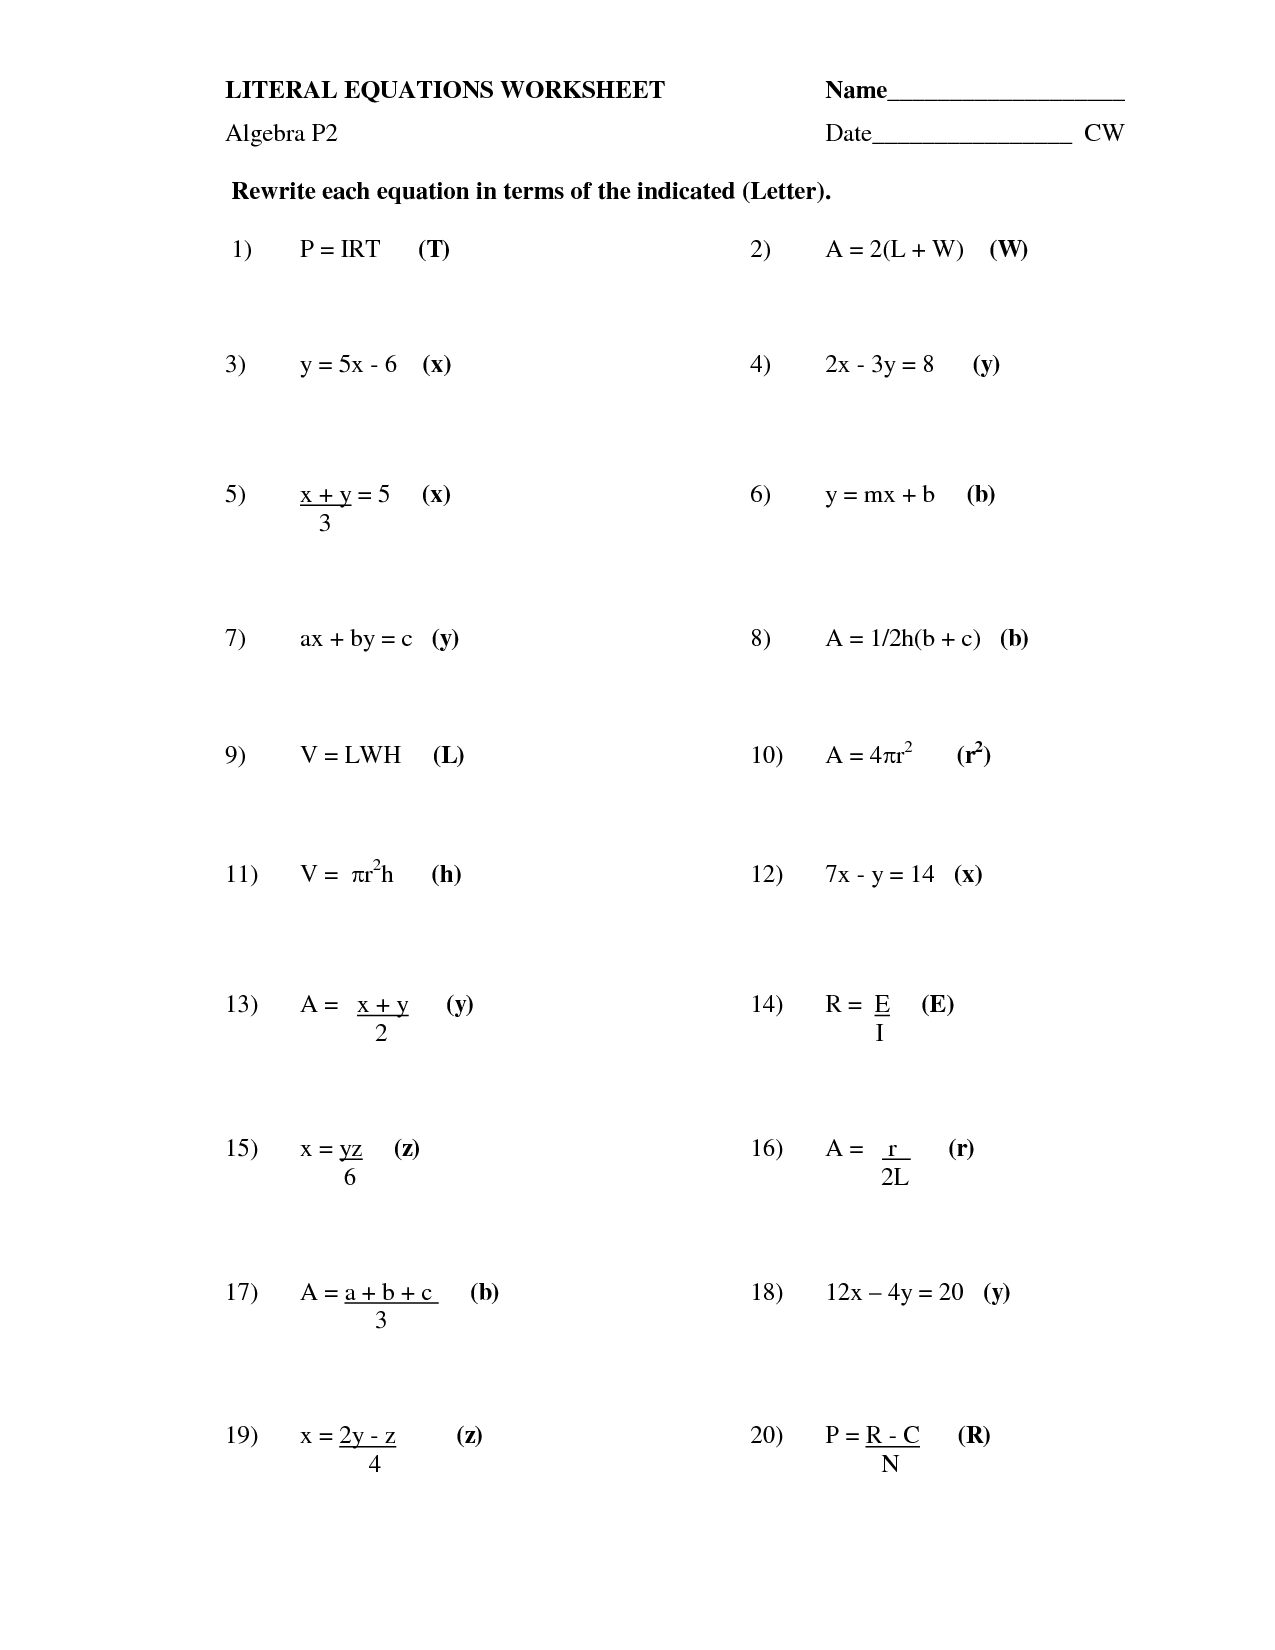 Algebra Literal Equations Worksheets Answers Image